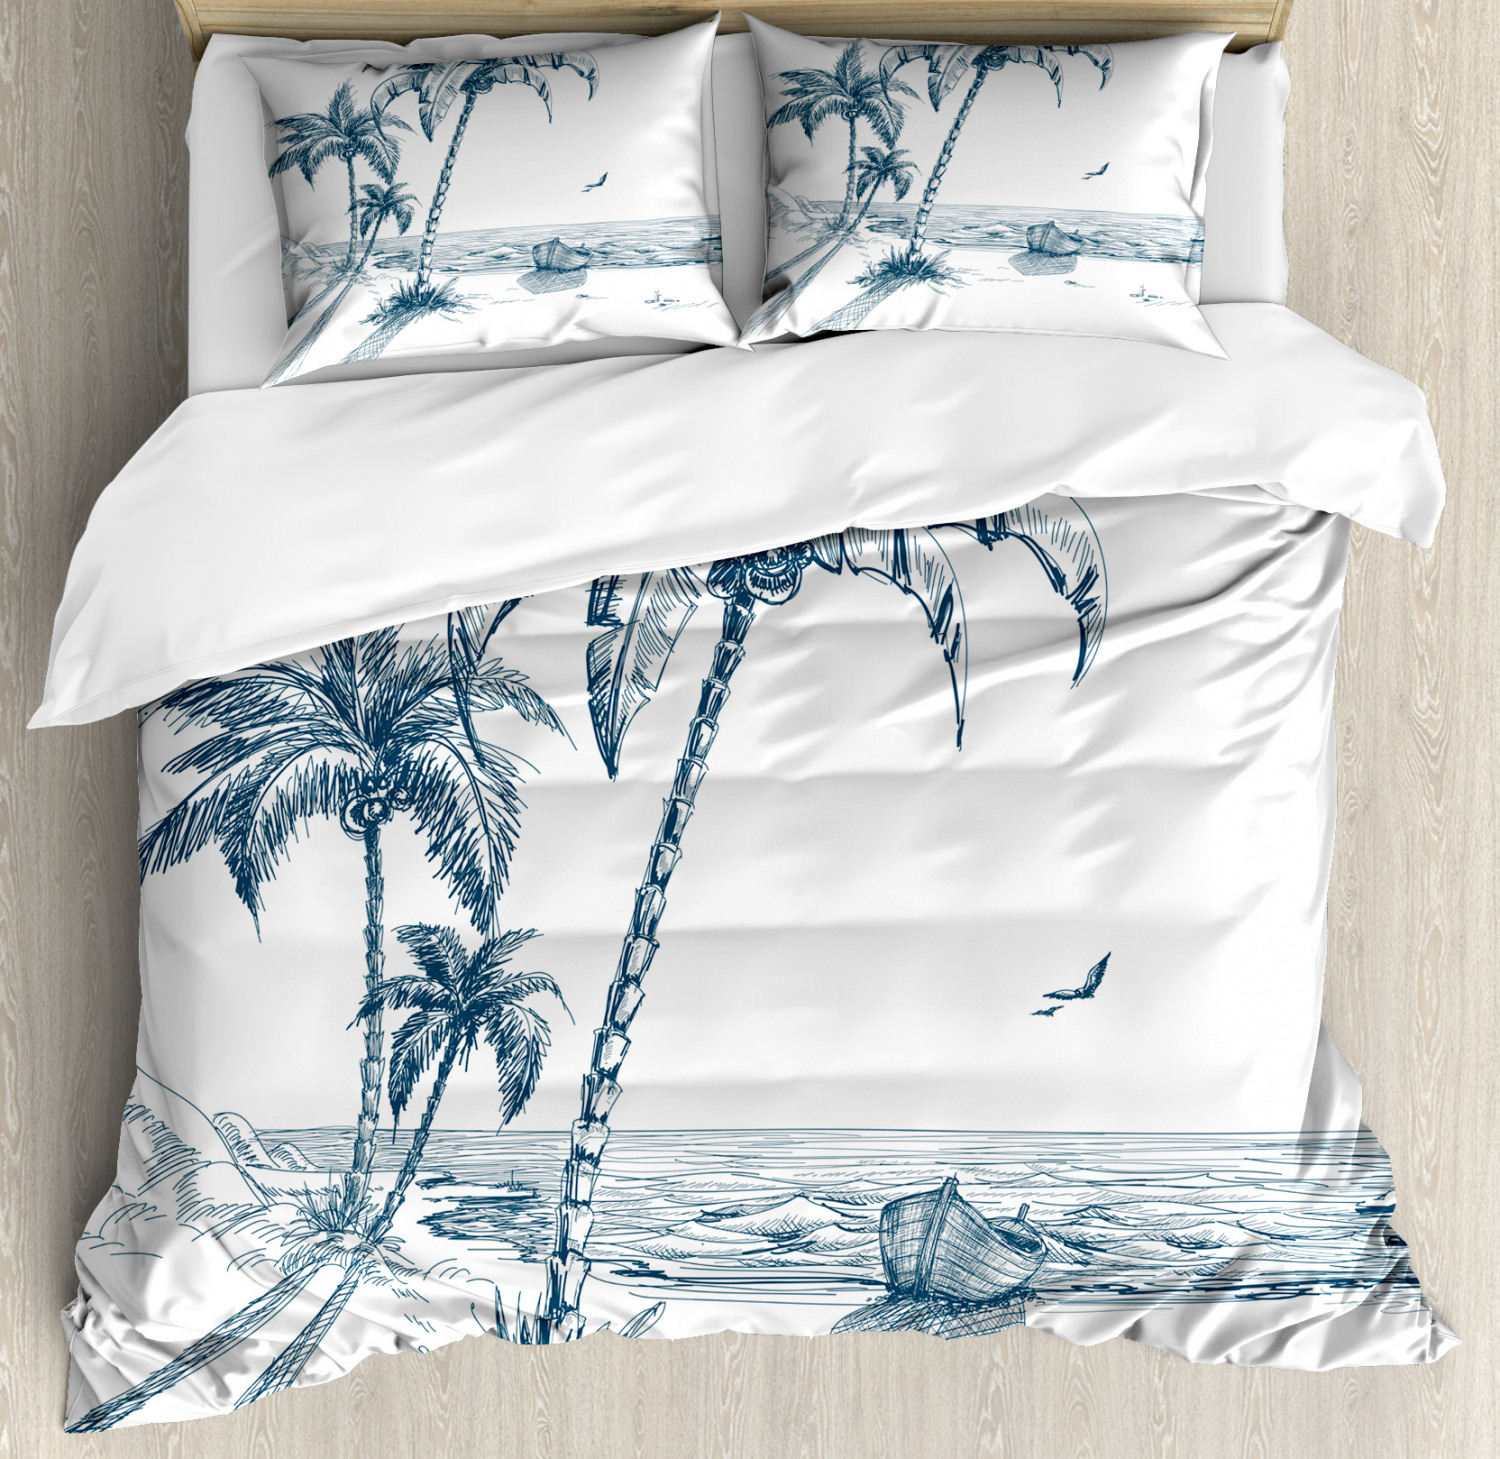 Island Duvet Cover Set With Pillow Shams Palm Tree Boat Sketch